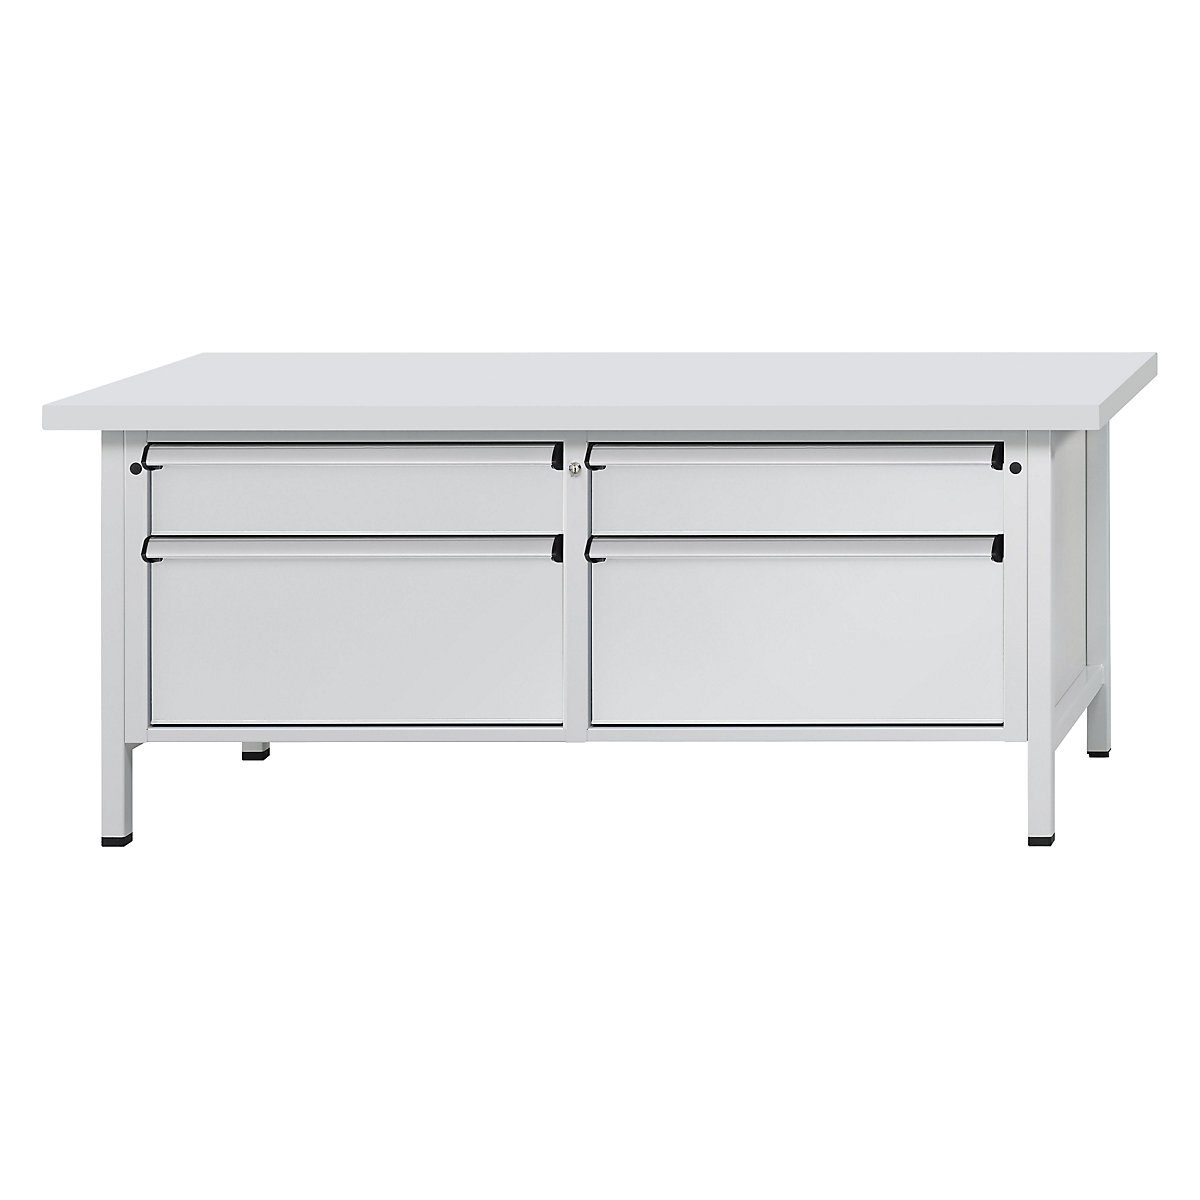 Workbench with XL/XXL drawers, frame construction – ANKE, width 2000 mm, 4 drawers, universal worktop, front in light grey-11